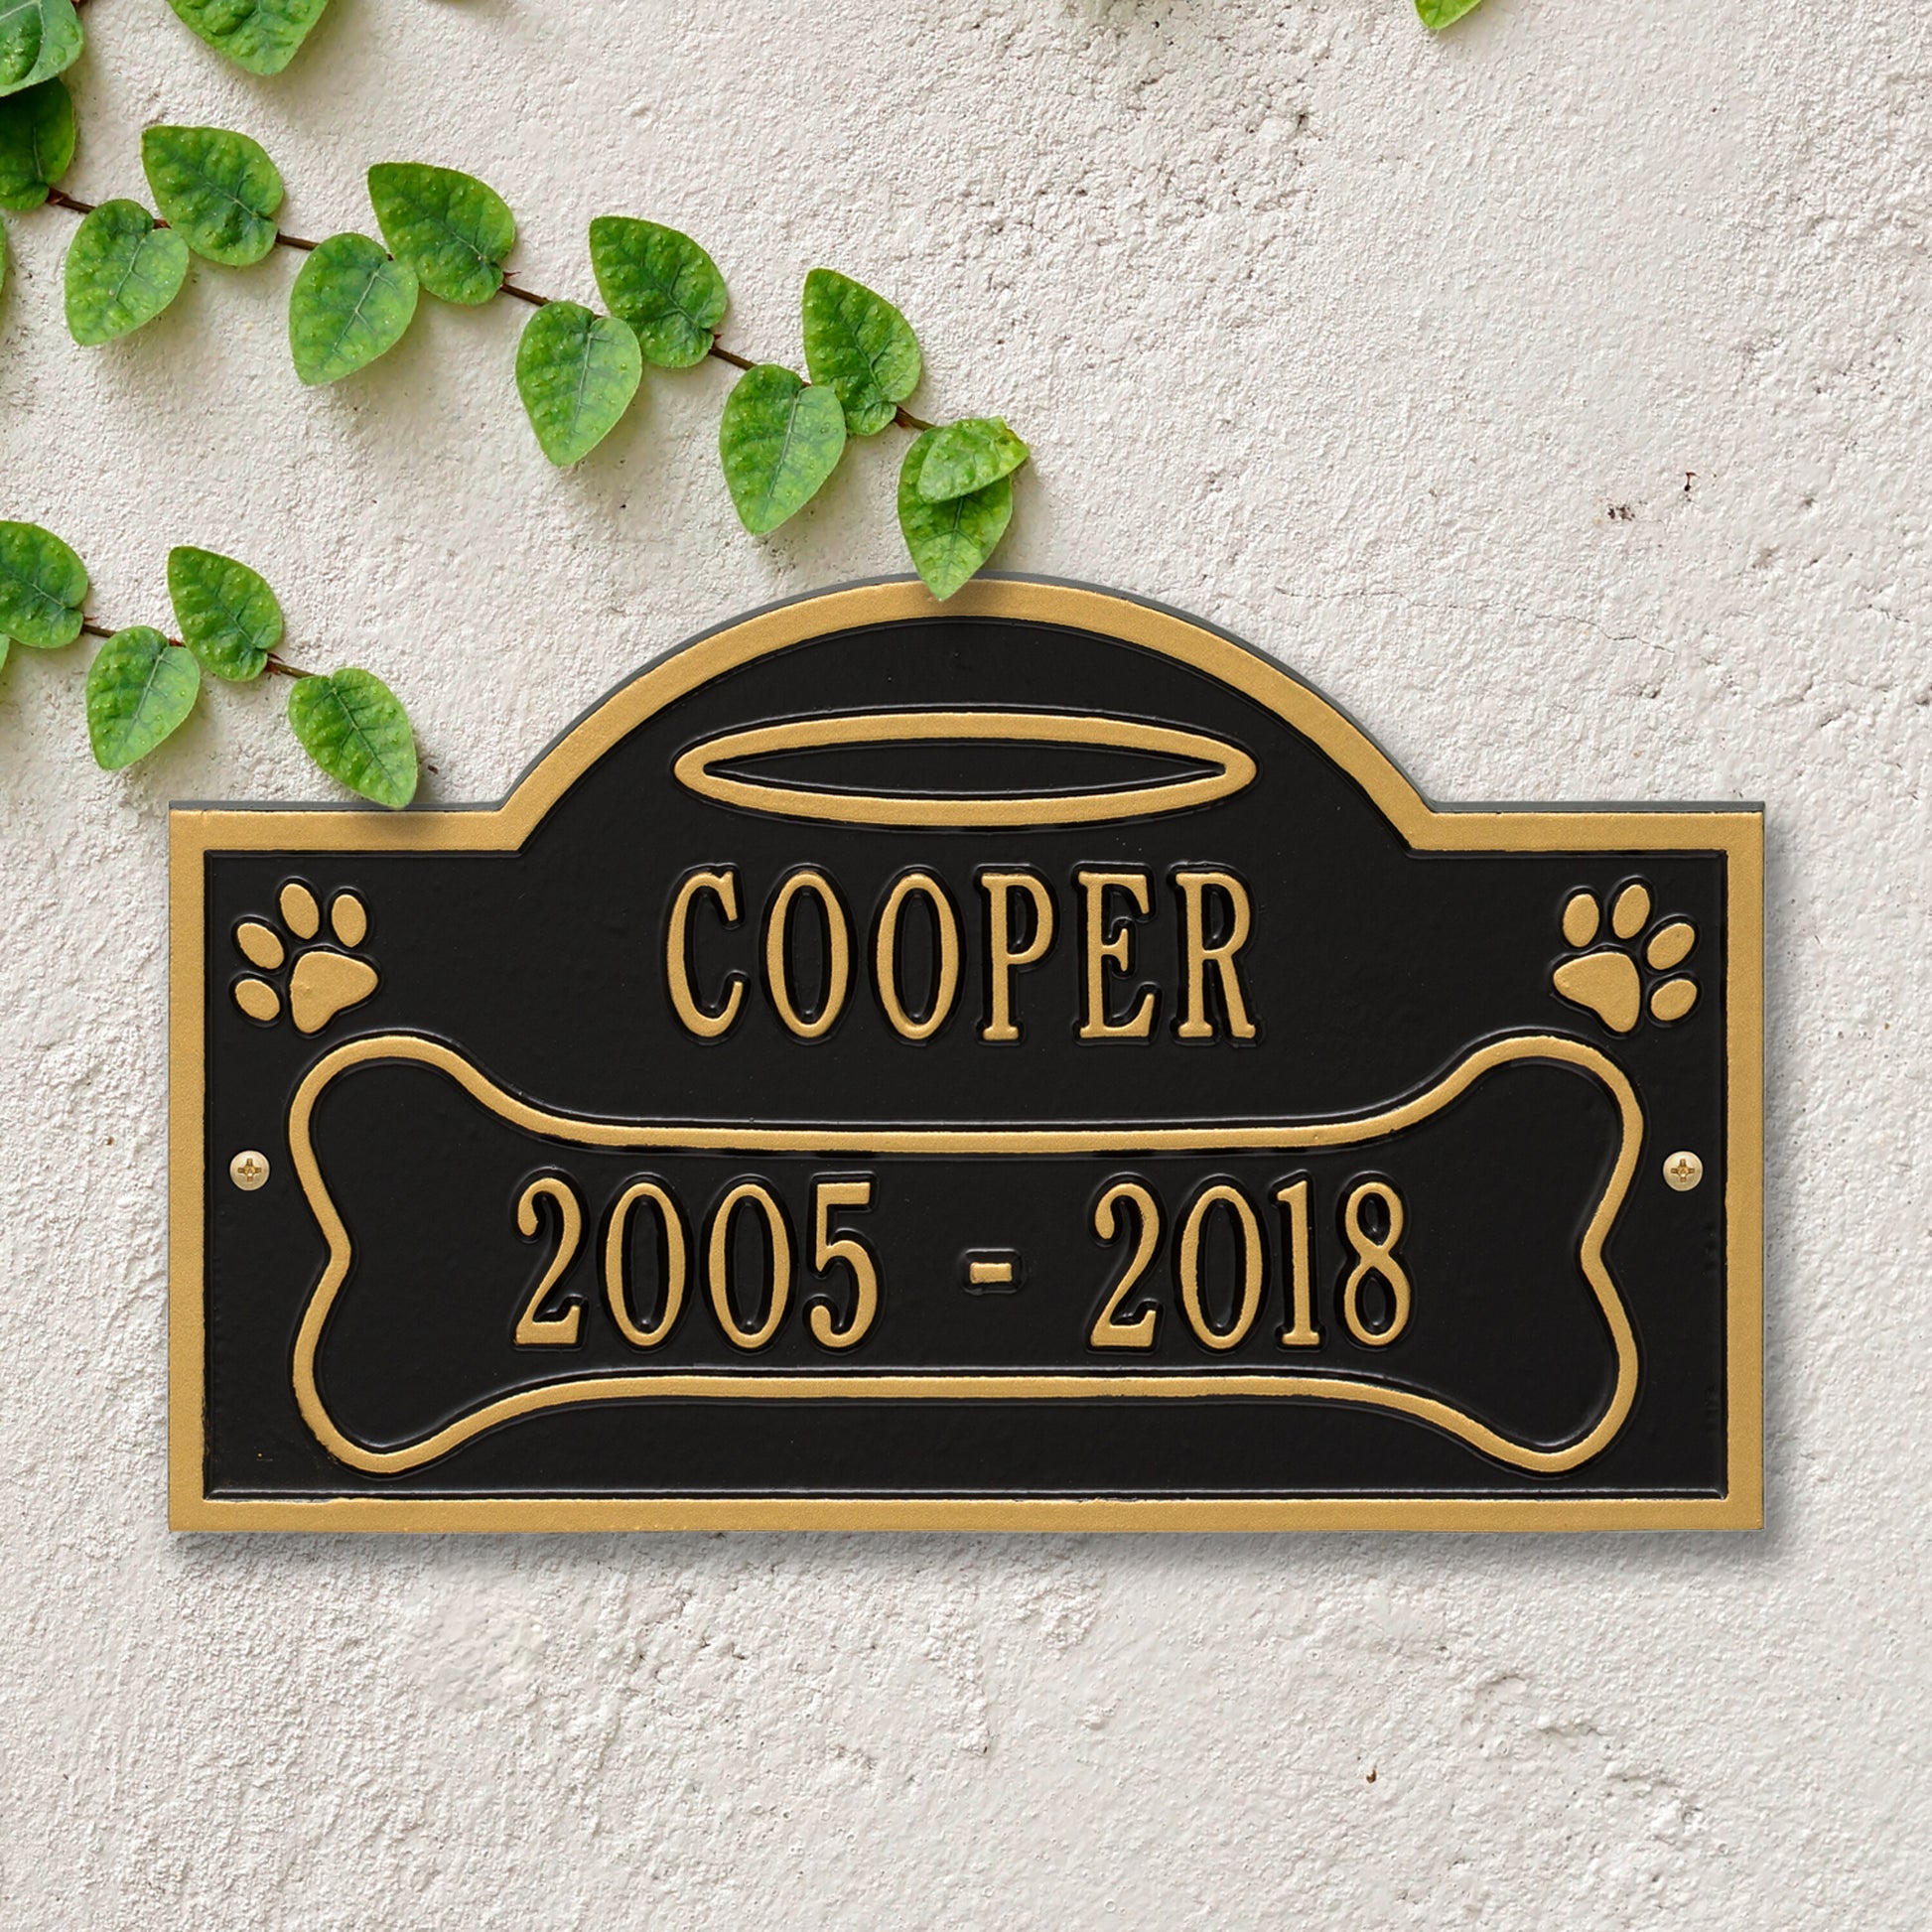 Whitehall Products All Dogs Go To Heaven Pet Memorial Personalized Wall Or Ground Plaque Two Lines Antique Copper